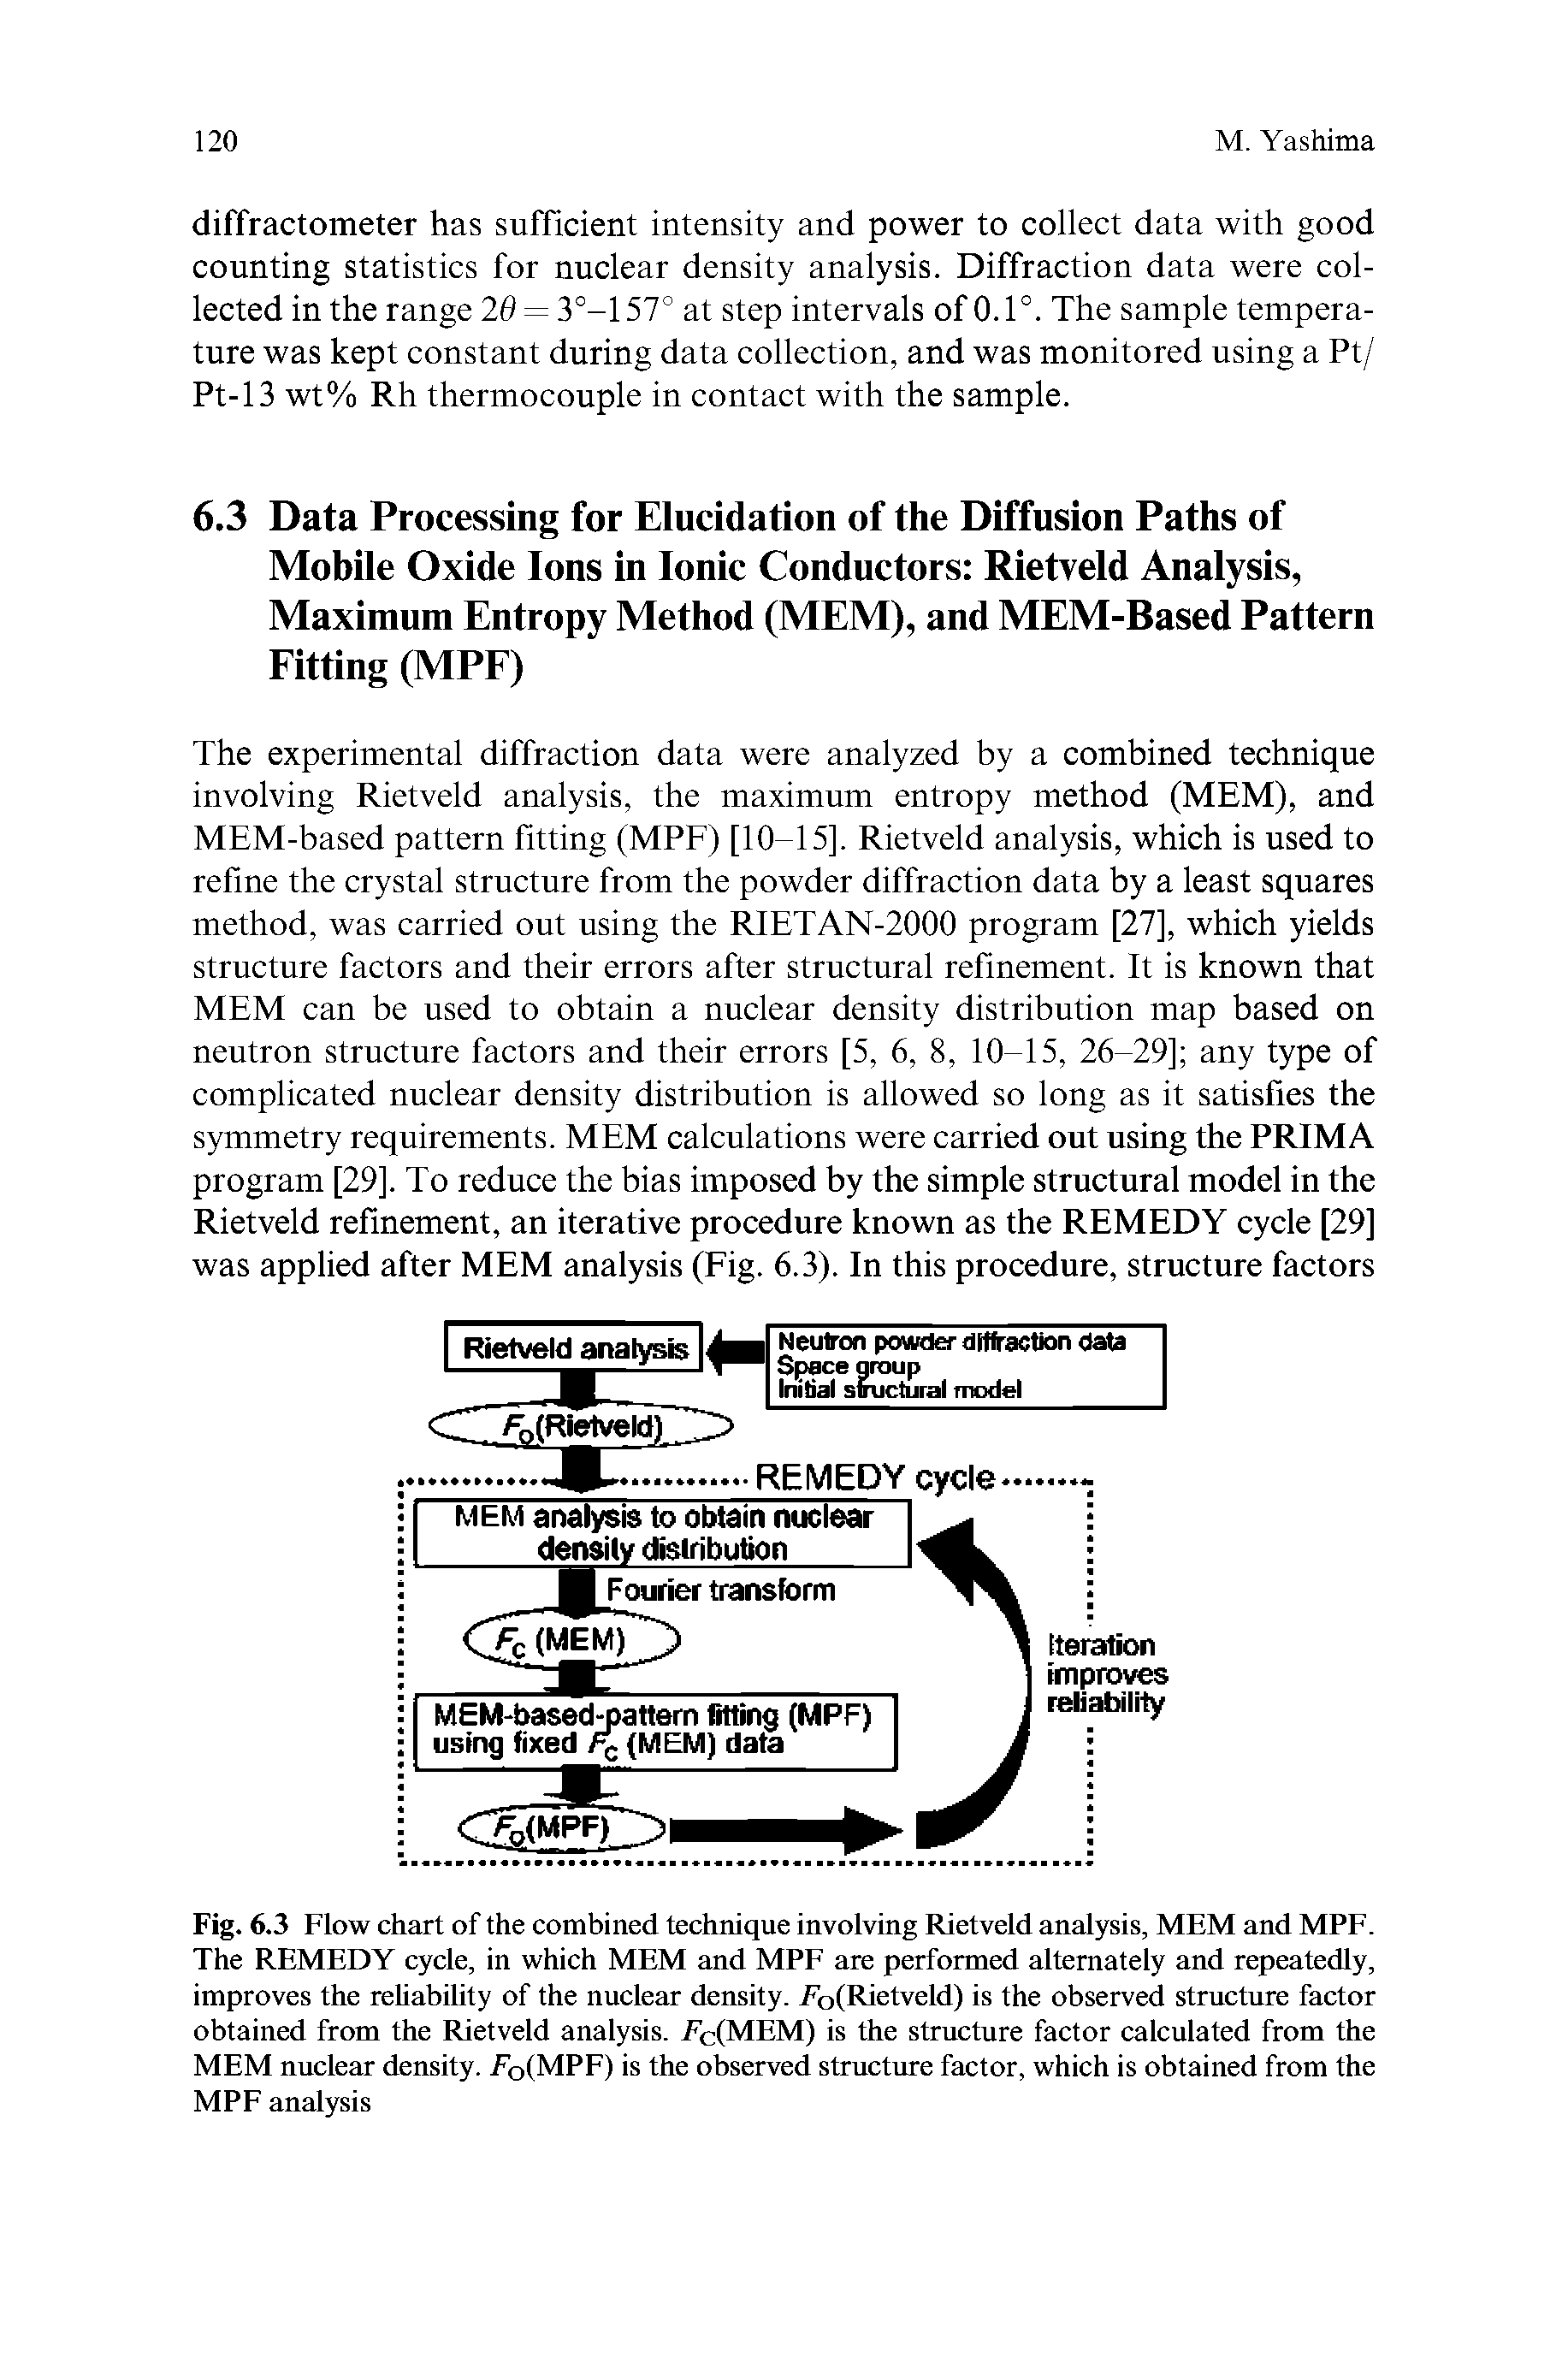 Fig. 6.3 Flow chart of the combined technique involving Rietveld analysis, MEM and MPF. The REMEDY cycle, in which MEM and MPF are performed alternately and repeatedly, improves the reliability of the nuclear density. Fo(Rietveld) is the observed structure factor obtained from the Rietveld analysis. FcfMEM) is the structure factor calculated from the MEM nuclear density. /b(MPF) is the observed structure factor, which is obtained from the MPF analysis...